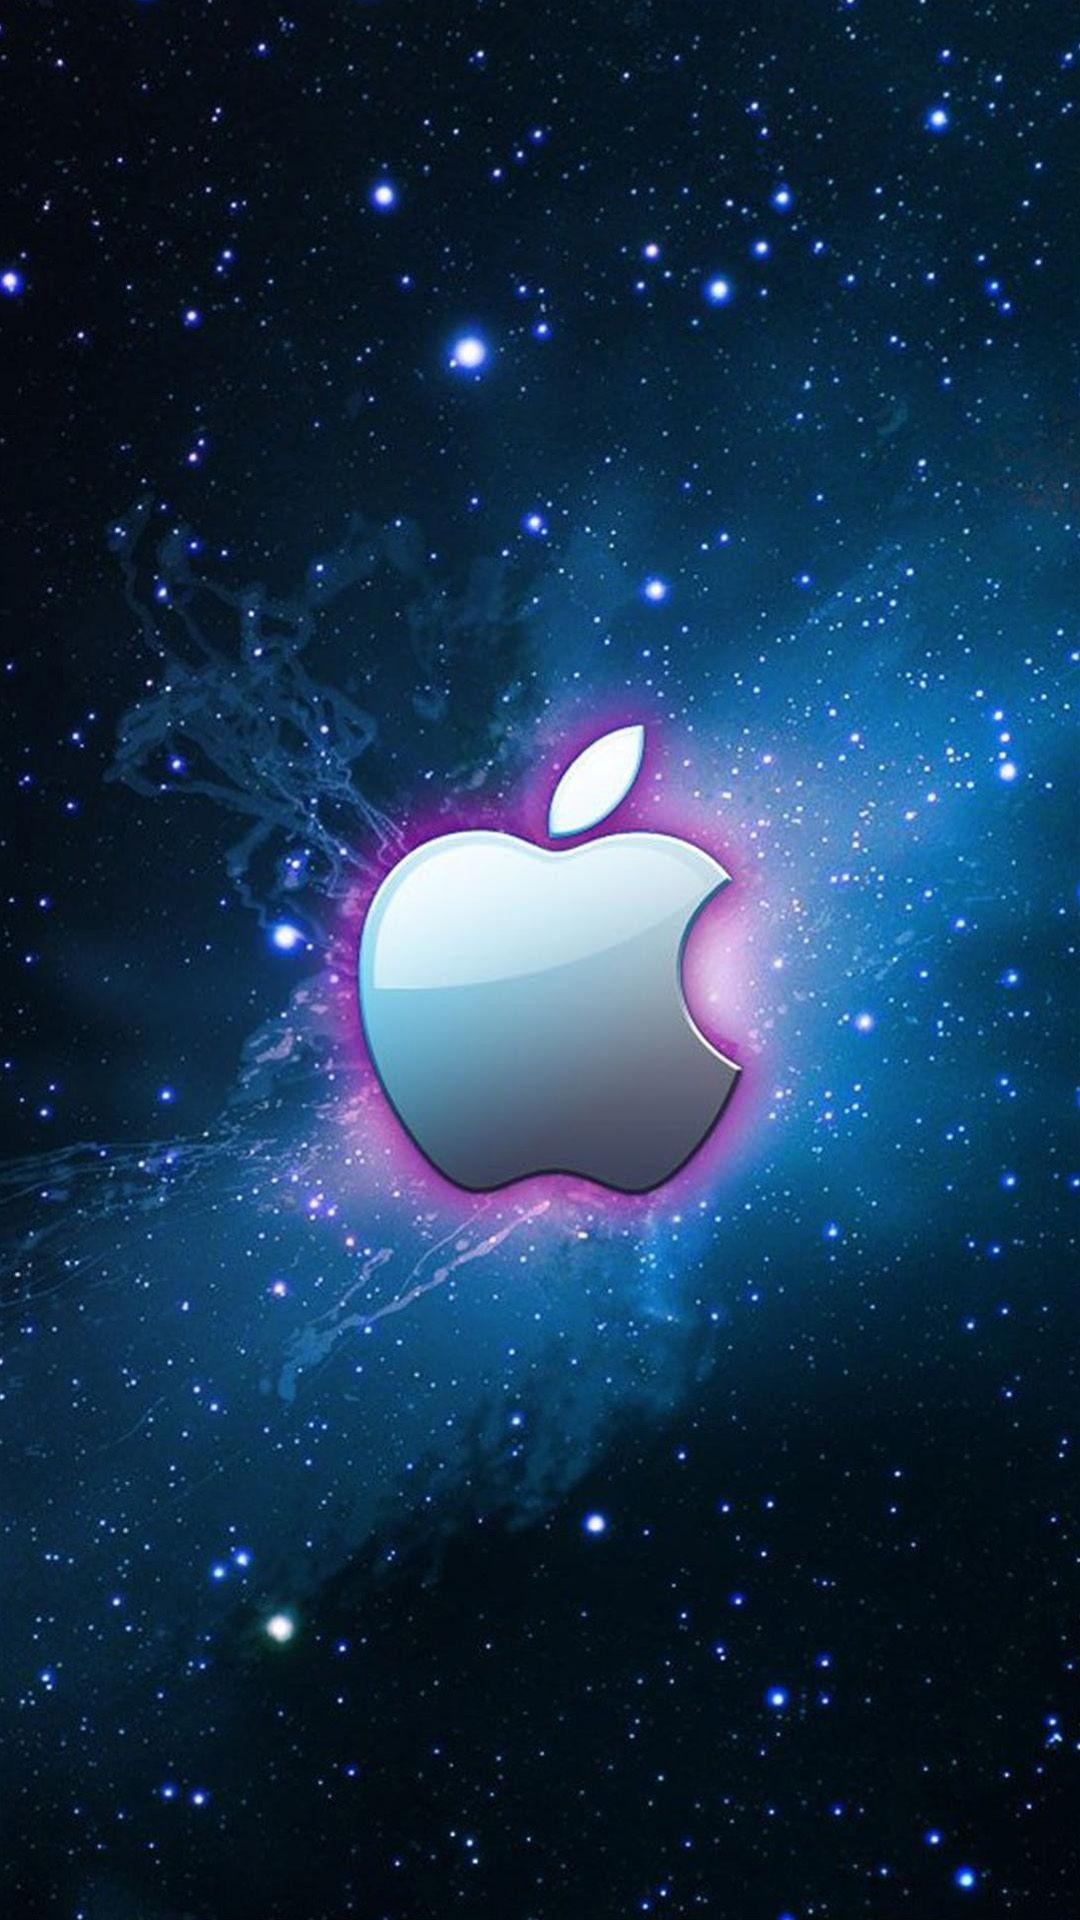 Apple Galaxy Wallpapers - Top Free Apple Galaxy Backgrounds ...